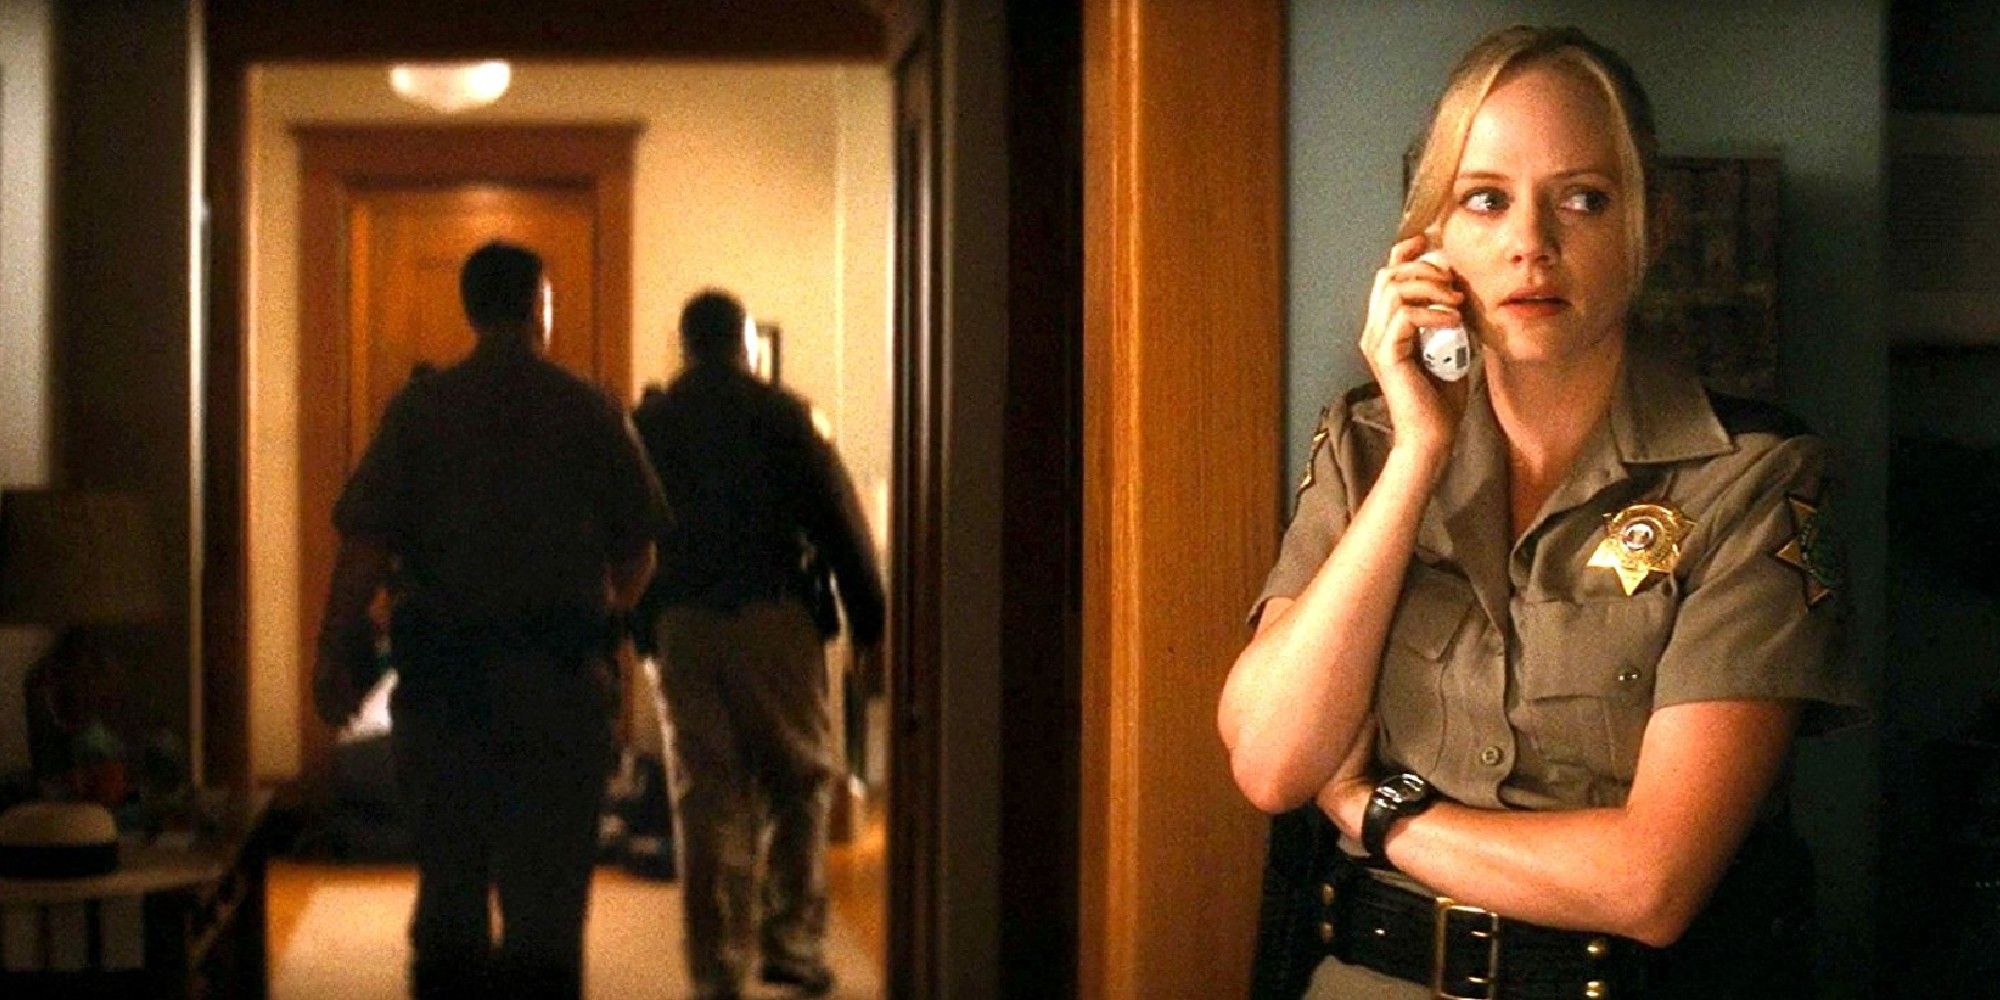 Judy talking on the phone in Scream 4